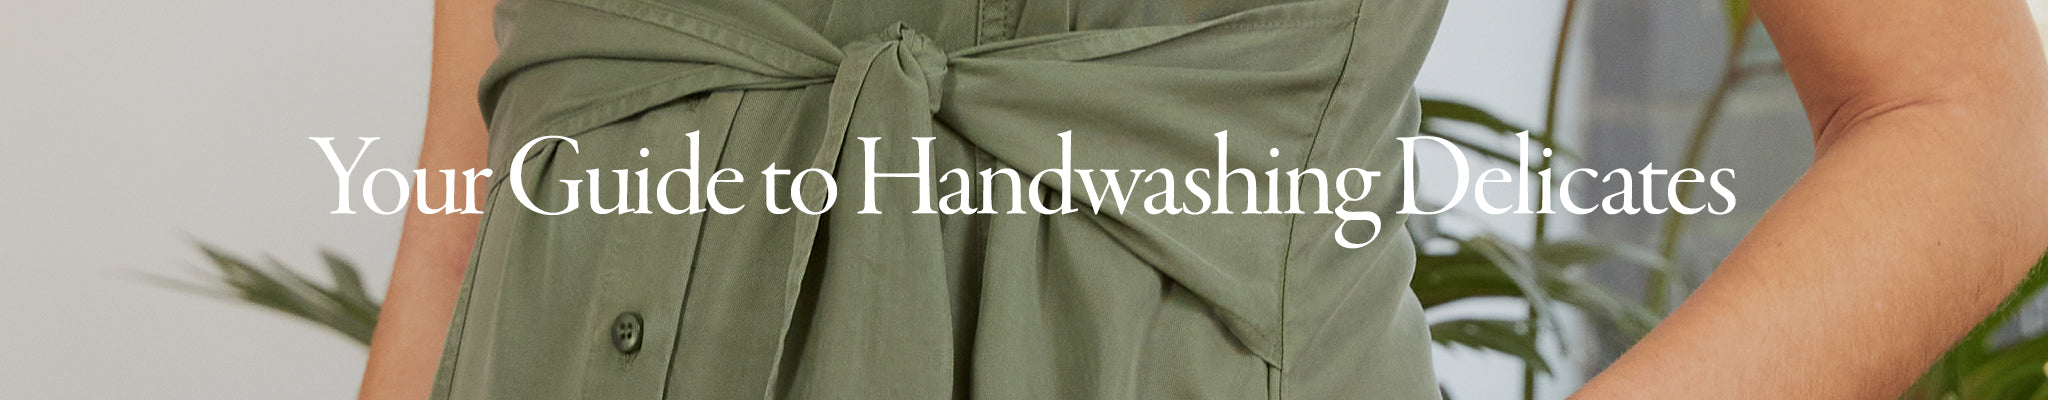 Your Guide to Handwashing Delicates